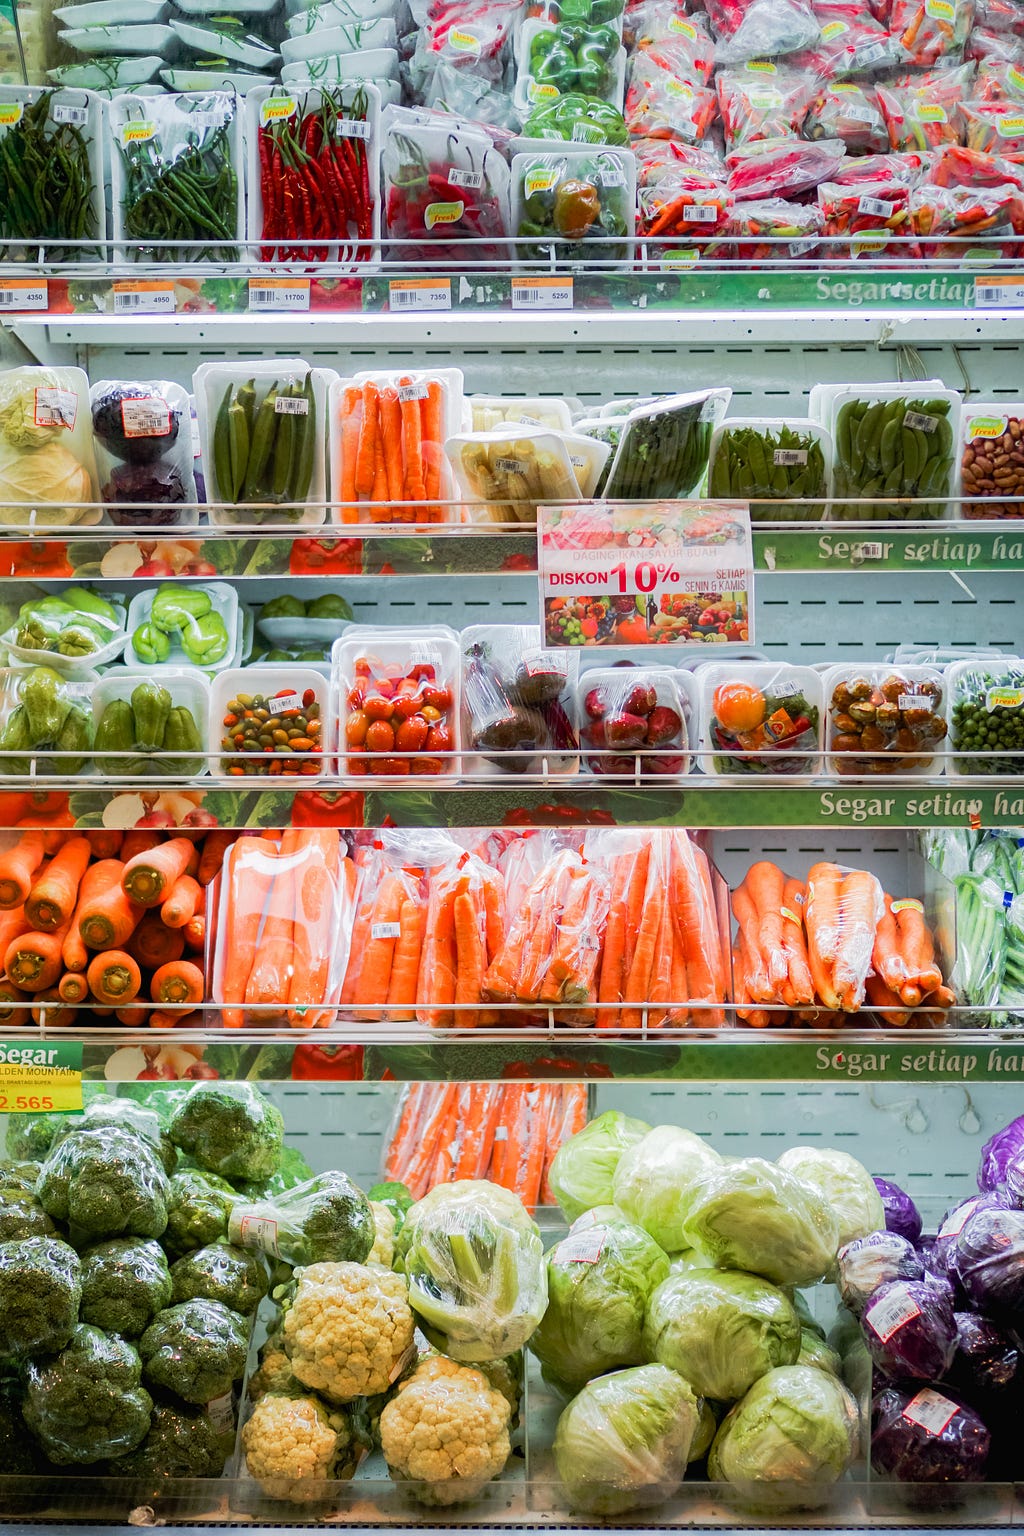 A section in the grocery where frozen fruits and vegetables are stored.